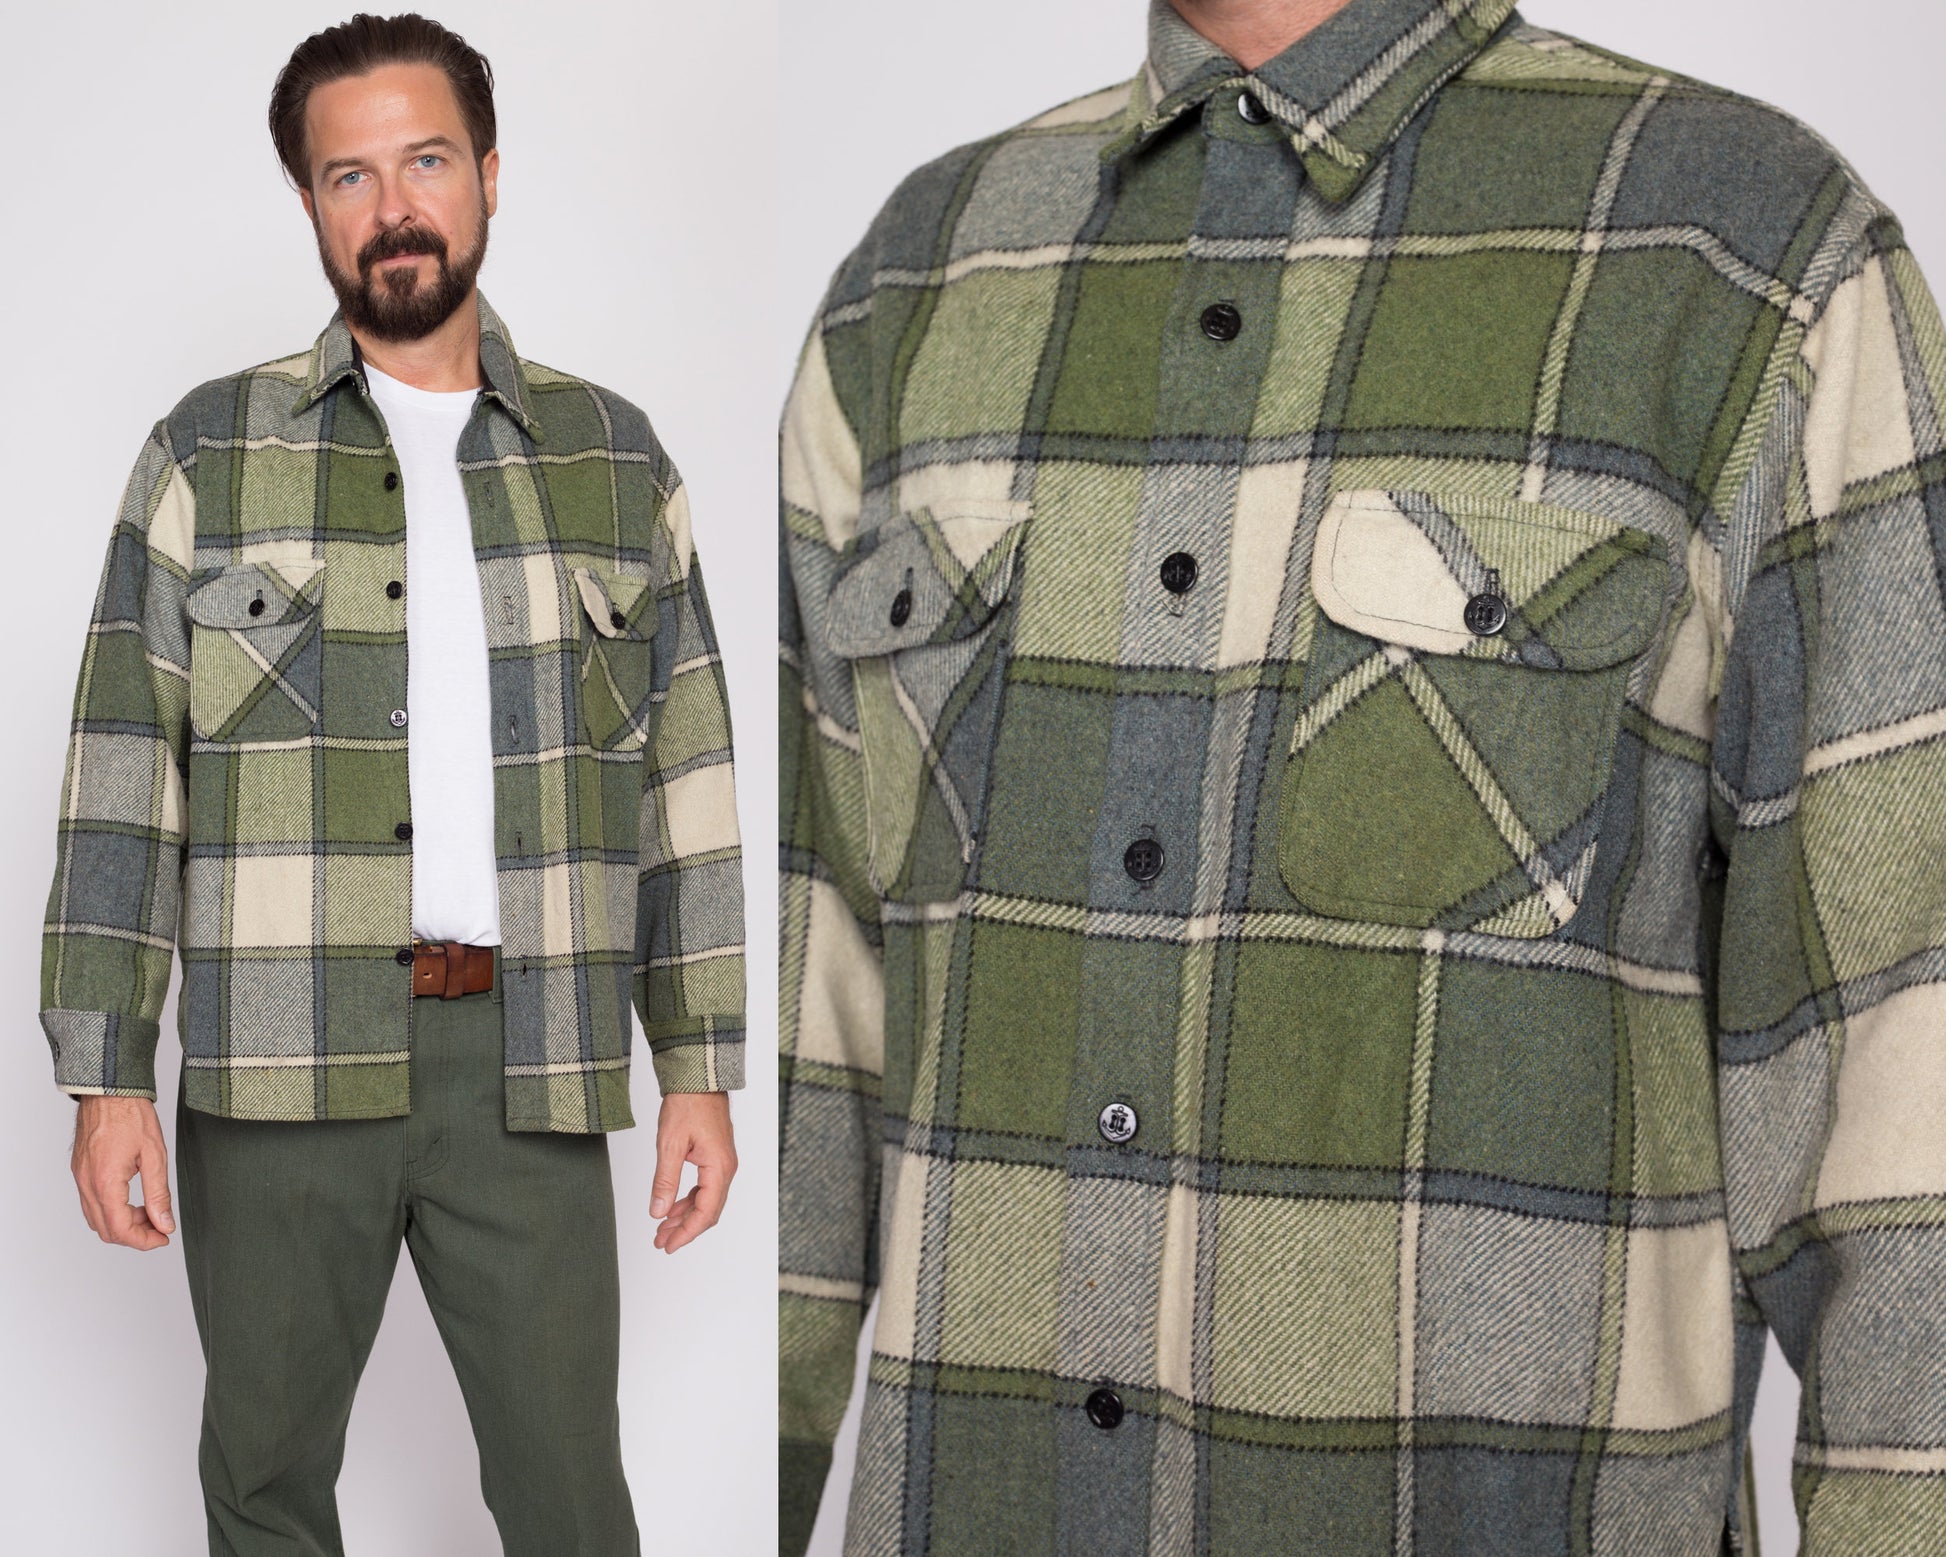 Large 70s Green Plaid Wool Shirt | Vintage Button Up Collared Overshirt Shacket